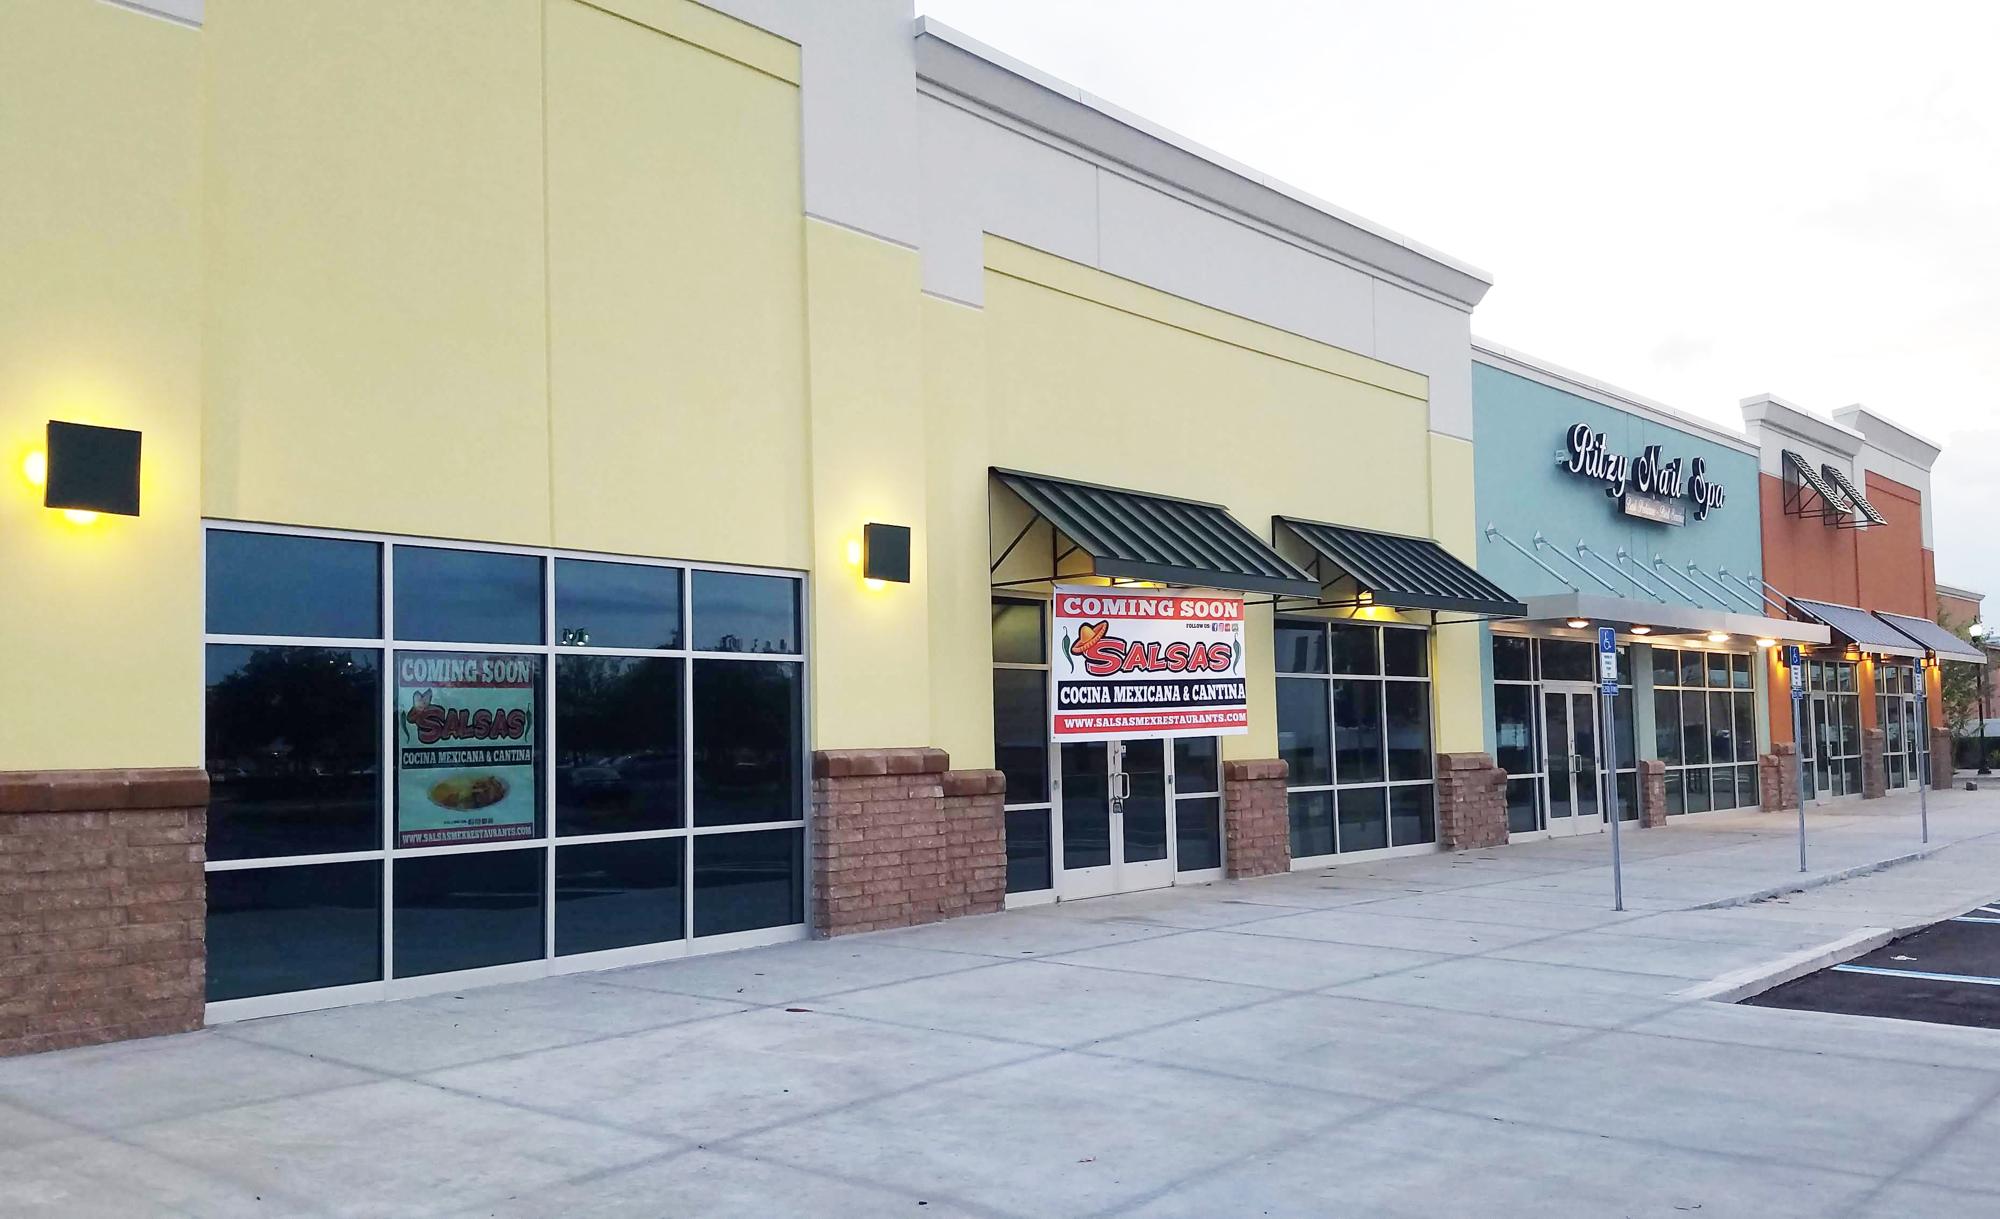 Salsas Mexican Restaurant intends to build-out at 13121 City Center Blvd. at River City Marketplace.